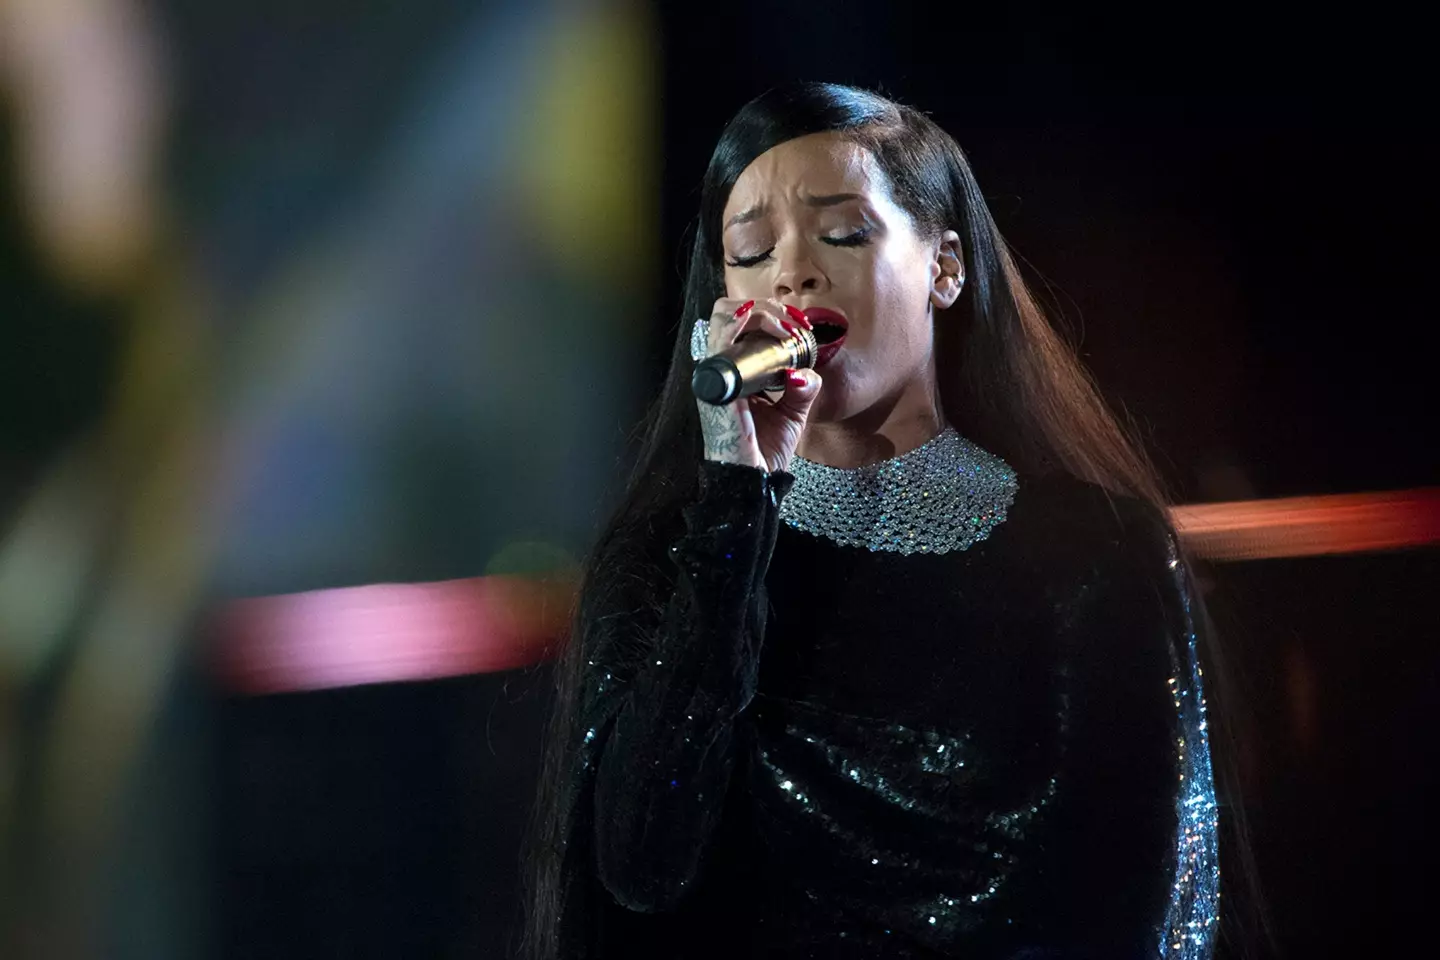 Rihanna performs during the Concert for Valor November 11, 2014, in Washington, D.C.